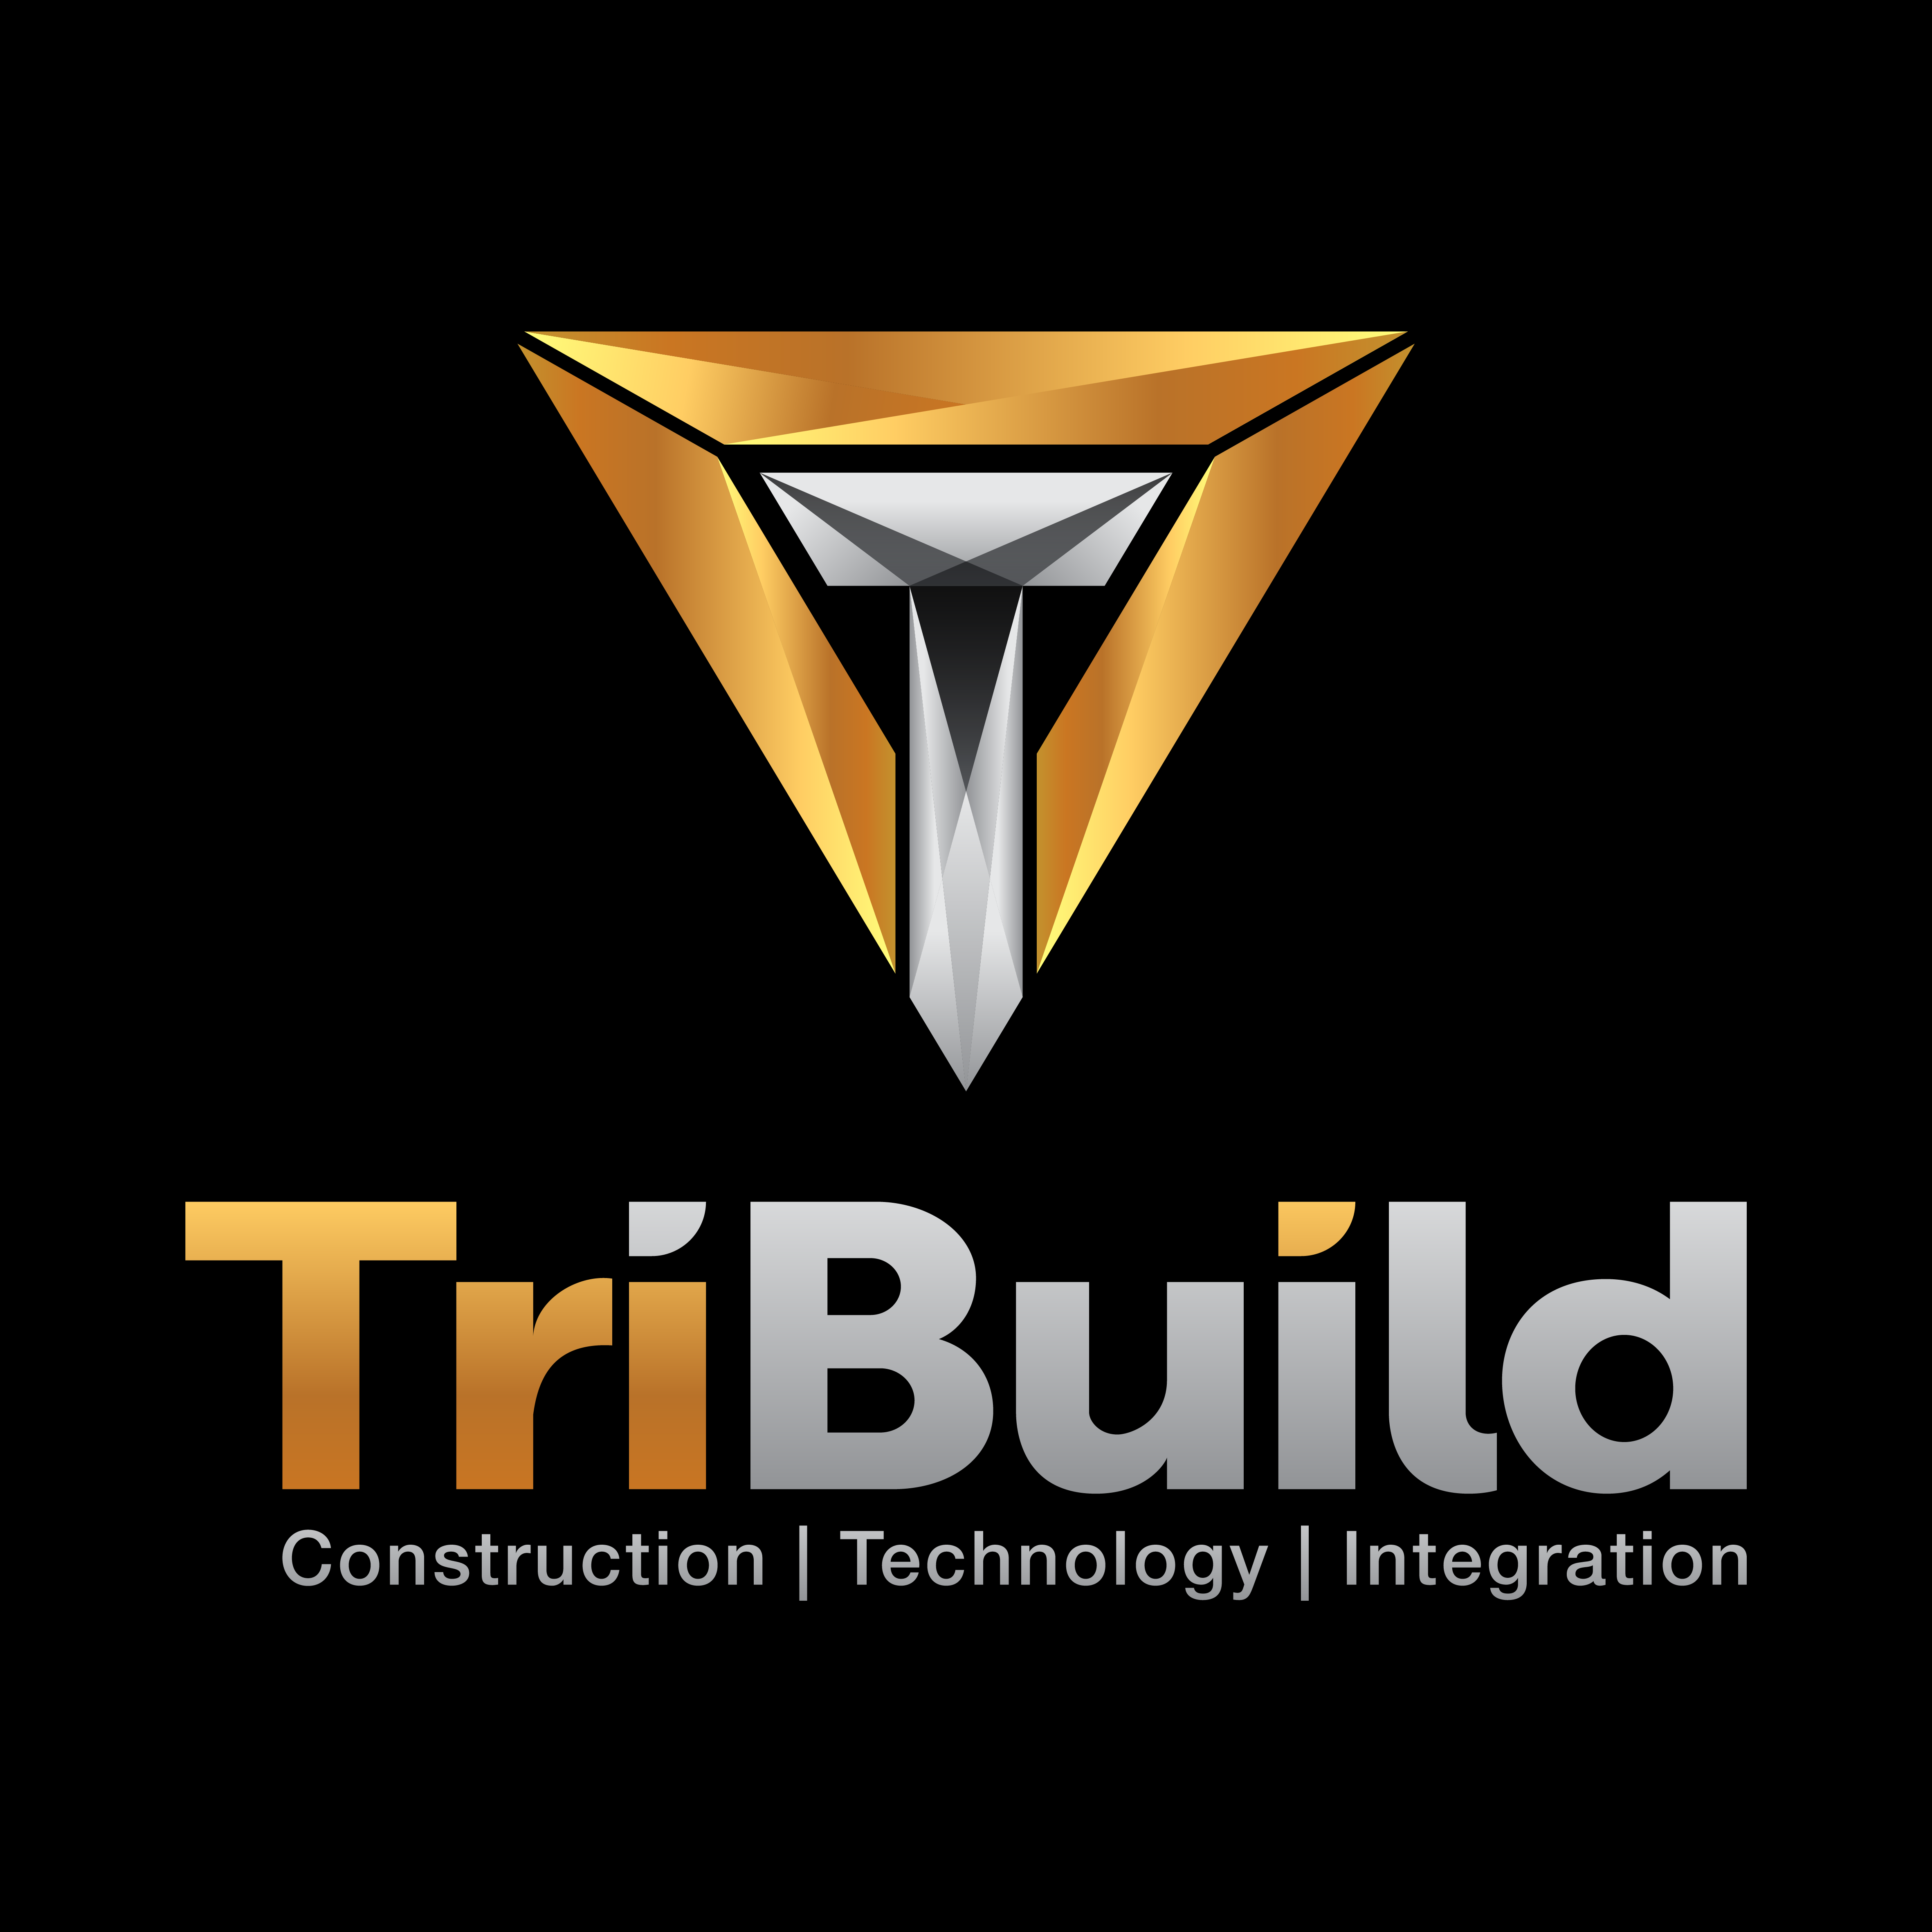 TriBuild, Inc. is a provider of software-as-a-service (SaaS) solutions for the construction industry.  TriBuild’s solutions are designed to help specialty trade contractors meet the growing demand for construction services by empowering them with new technologies and work flows that increase accuracy, boost productivity and optimize profitability. 